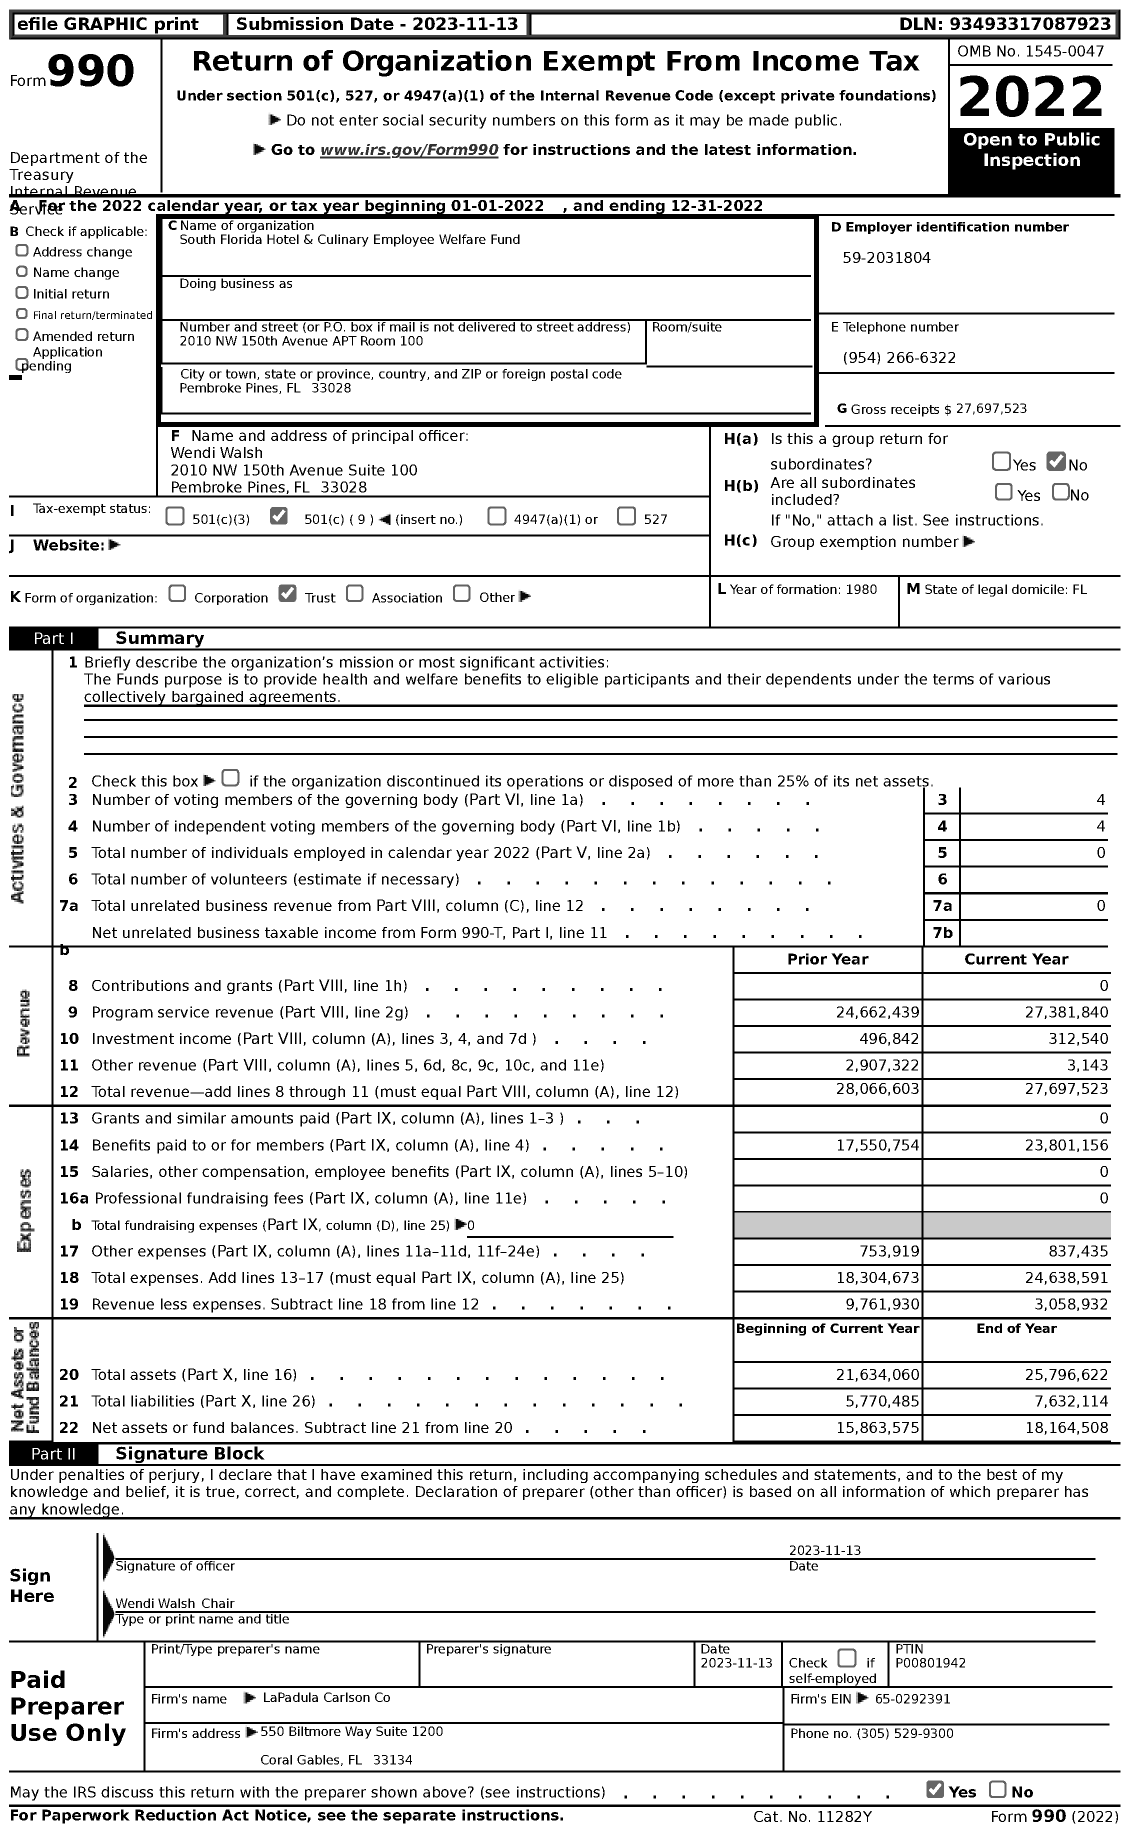 Image of first page of 2022 Form 990 for South Florida Hotel & Culinary Employee Welfare Fund